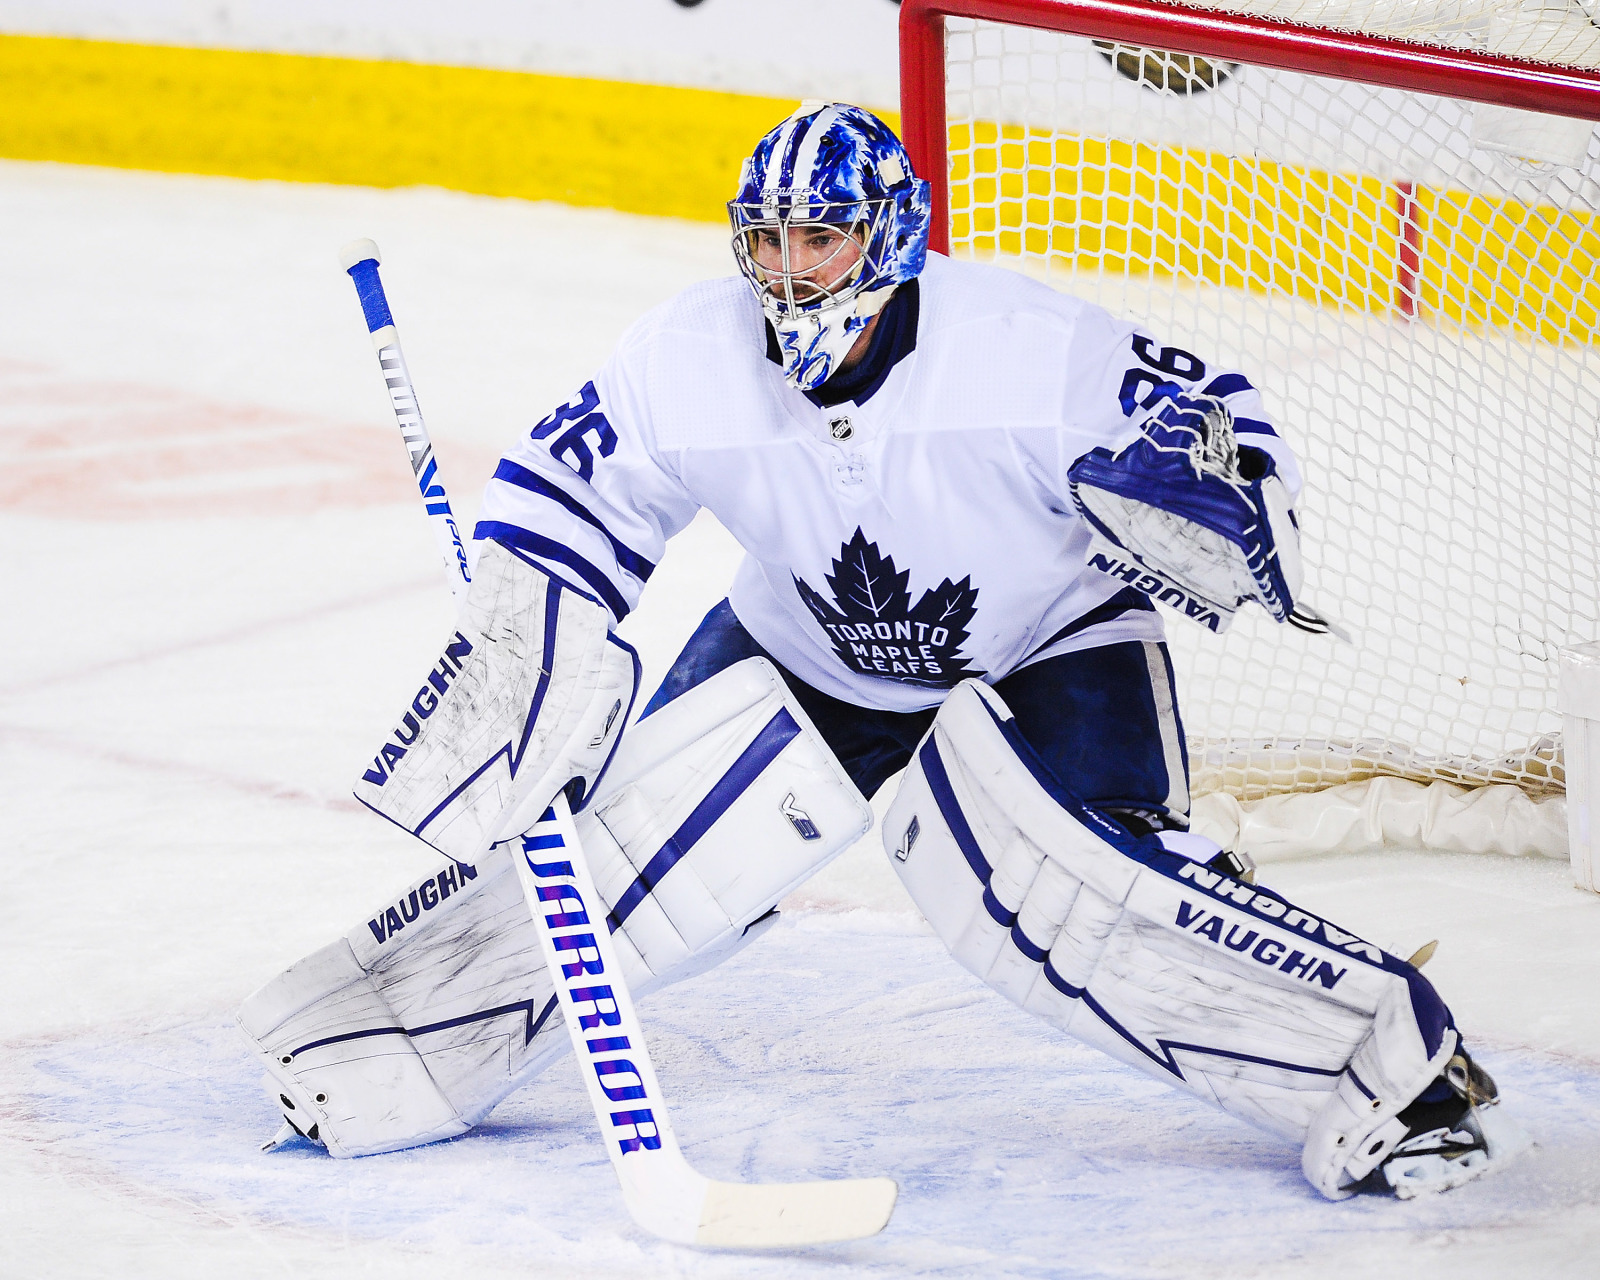 Gallery: Toronto Maple Leafs players headed to Sochi 2014